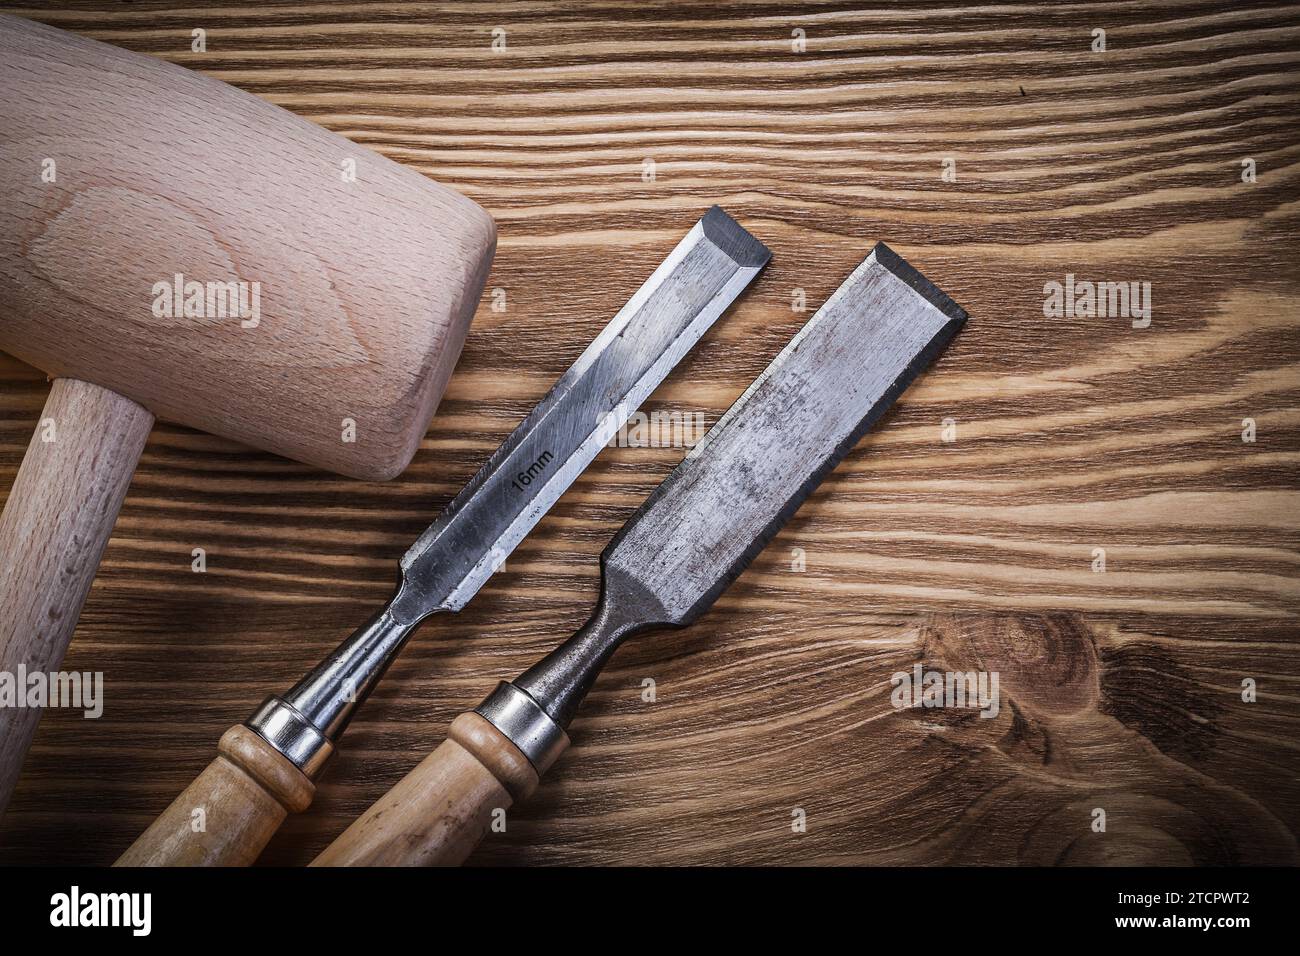 Lump hammer flat chisel on vintage wooden panel Building concept Stock Photo